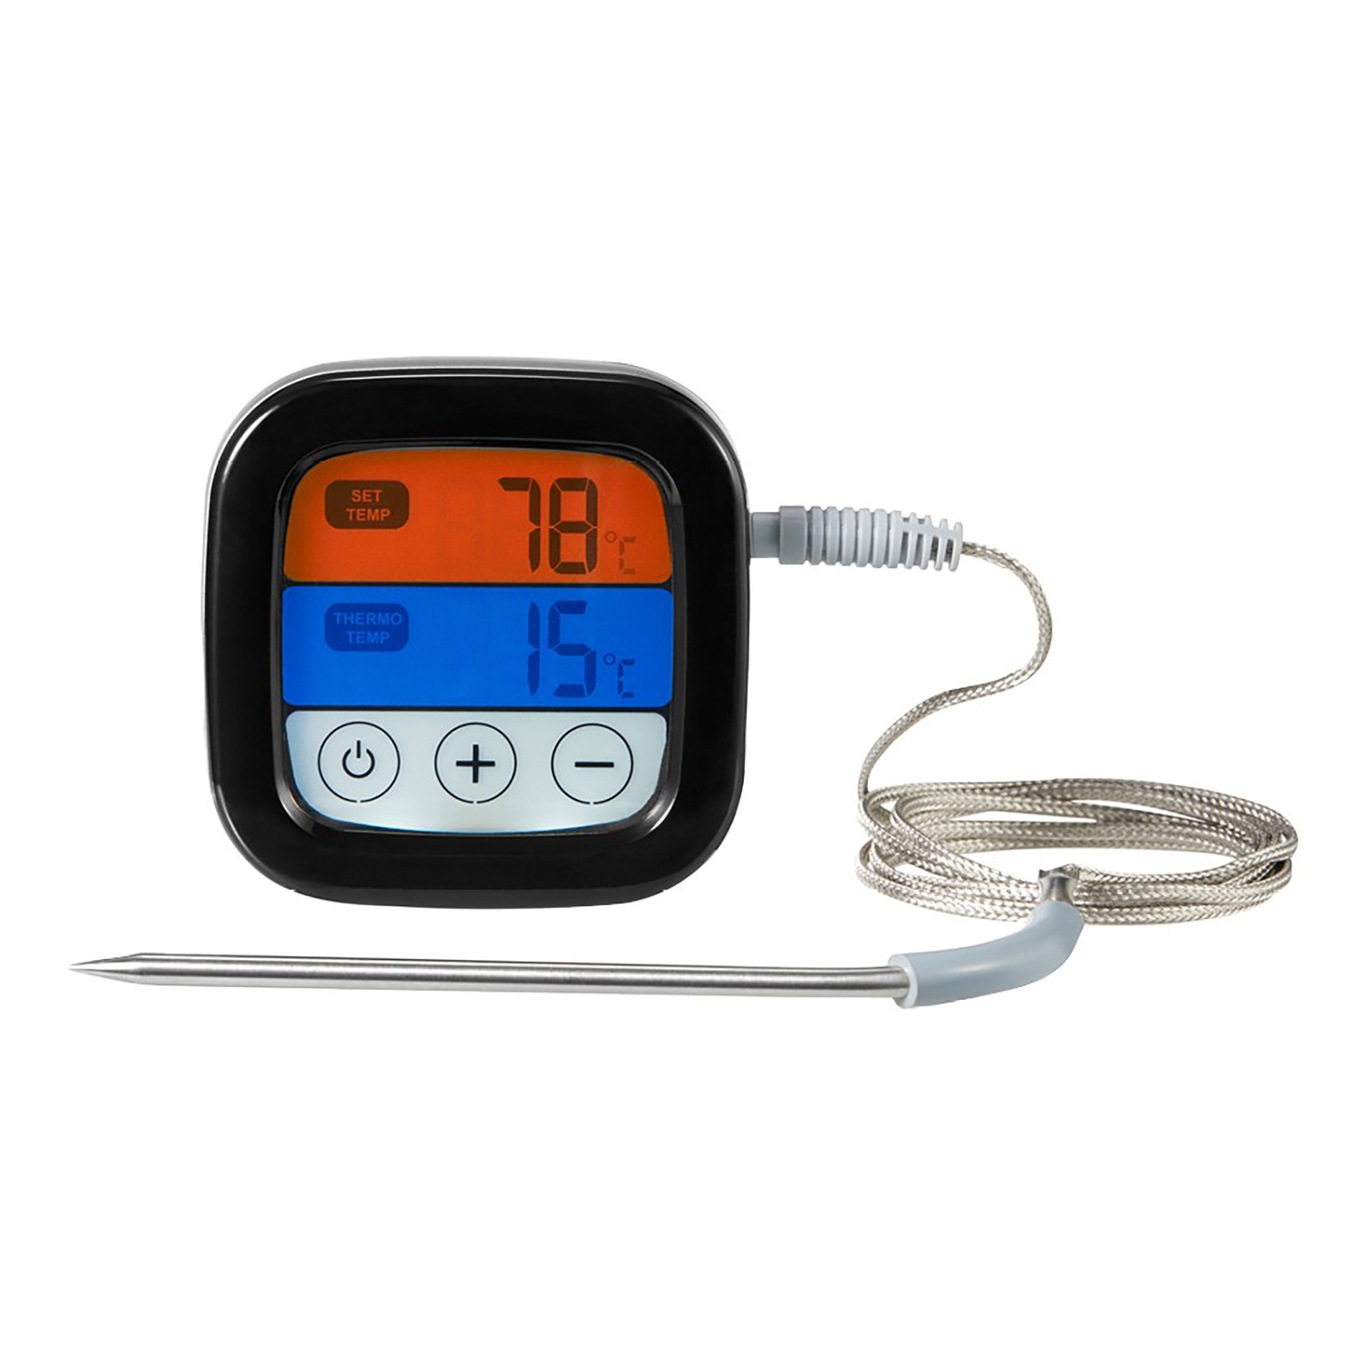 https://royaldesign.com/image/2/dorre-statu-meat-thermometer-with-bluetooth-0?w=800&quality=80